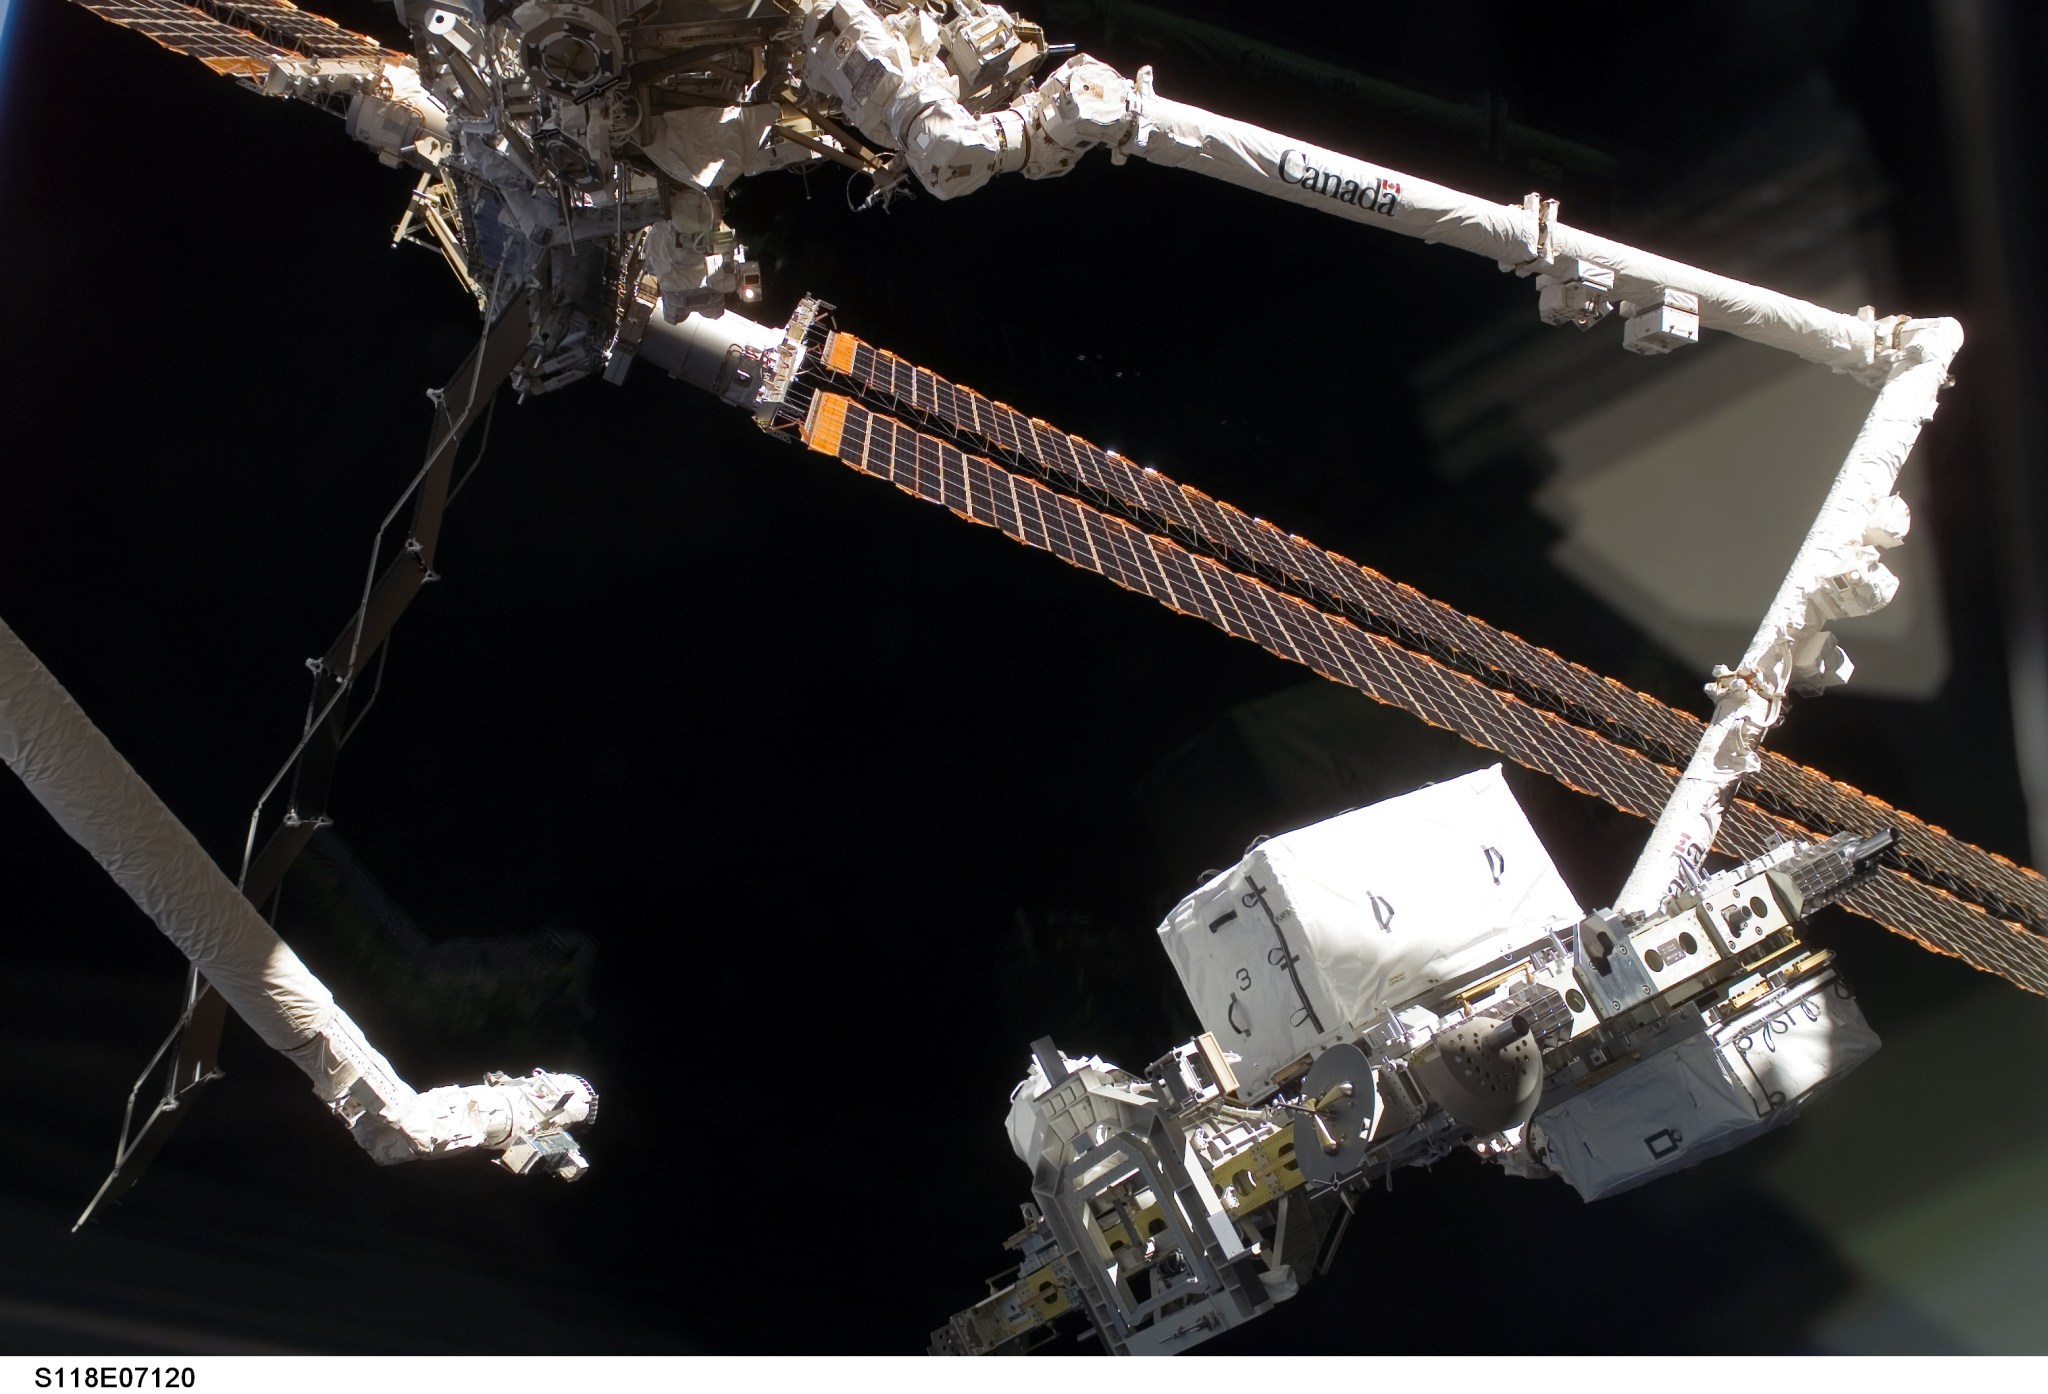 Space shuttle Endeavour's robotic arm (left) moves away following the hand-off of the External Stowage Platform-3 (ESP-3) to the International Space Station's Canadarm2 robotic arm during the STS-118 and Expedition 15 missions on Aug. 14, 2007. The Canadarm2 would install the ESP-3 on the station's Port-3 truss segment.